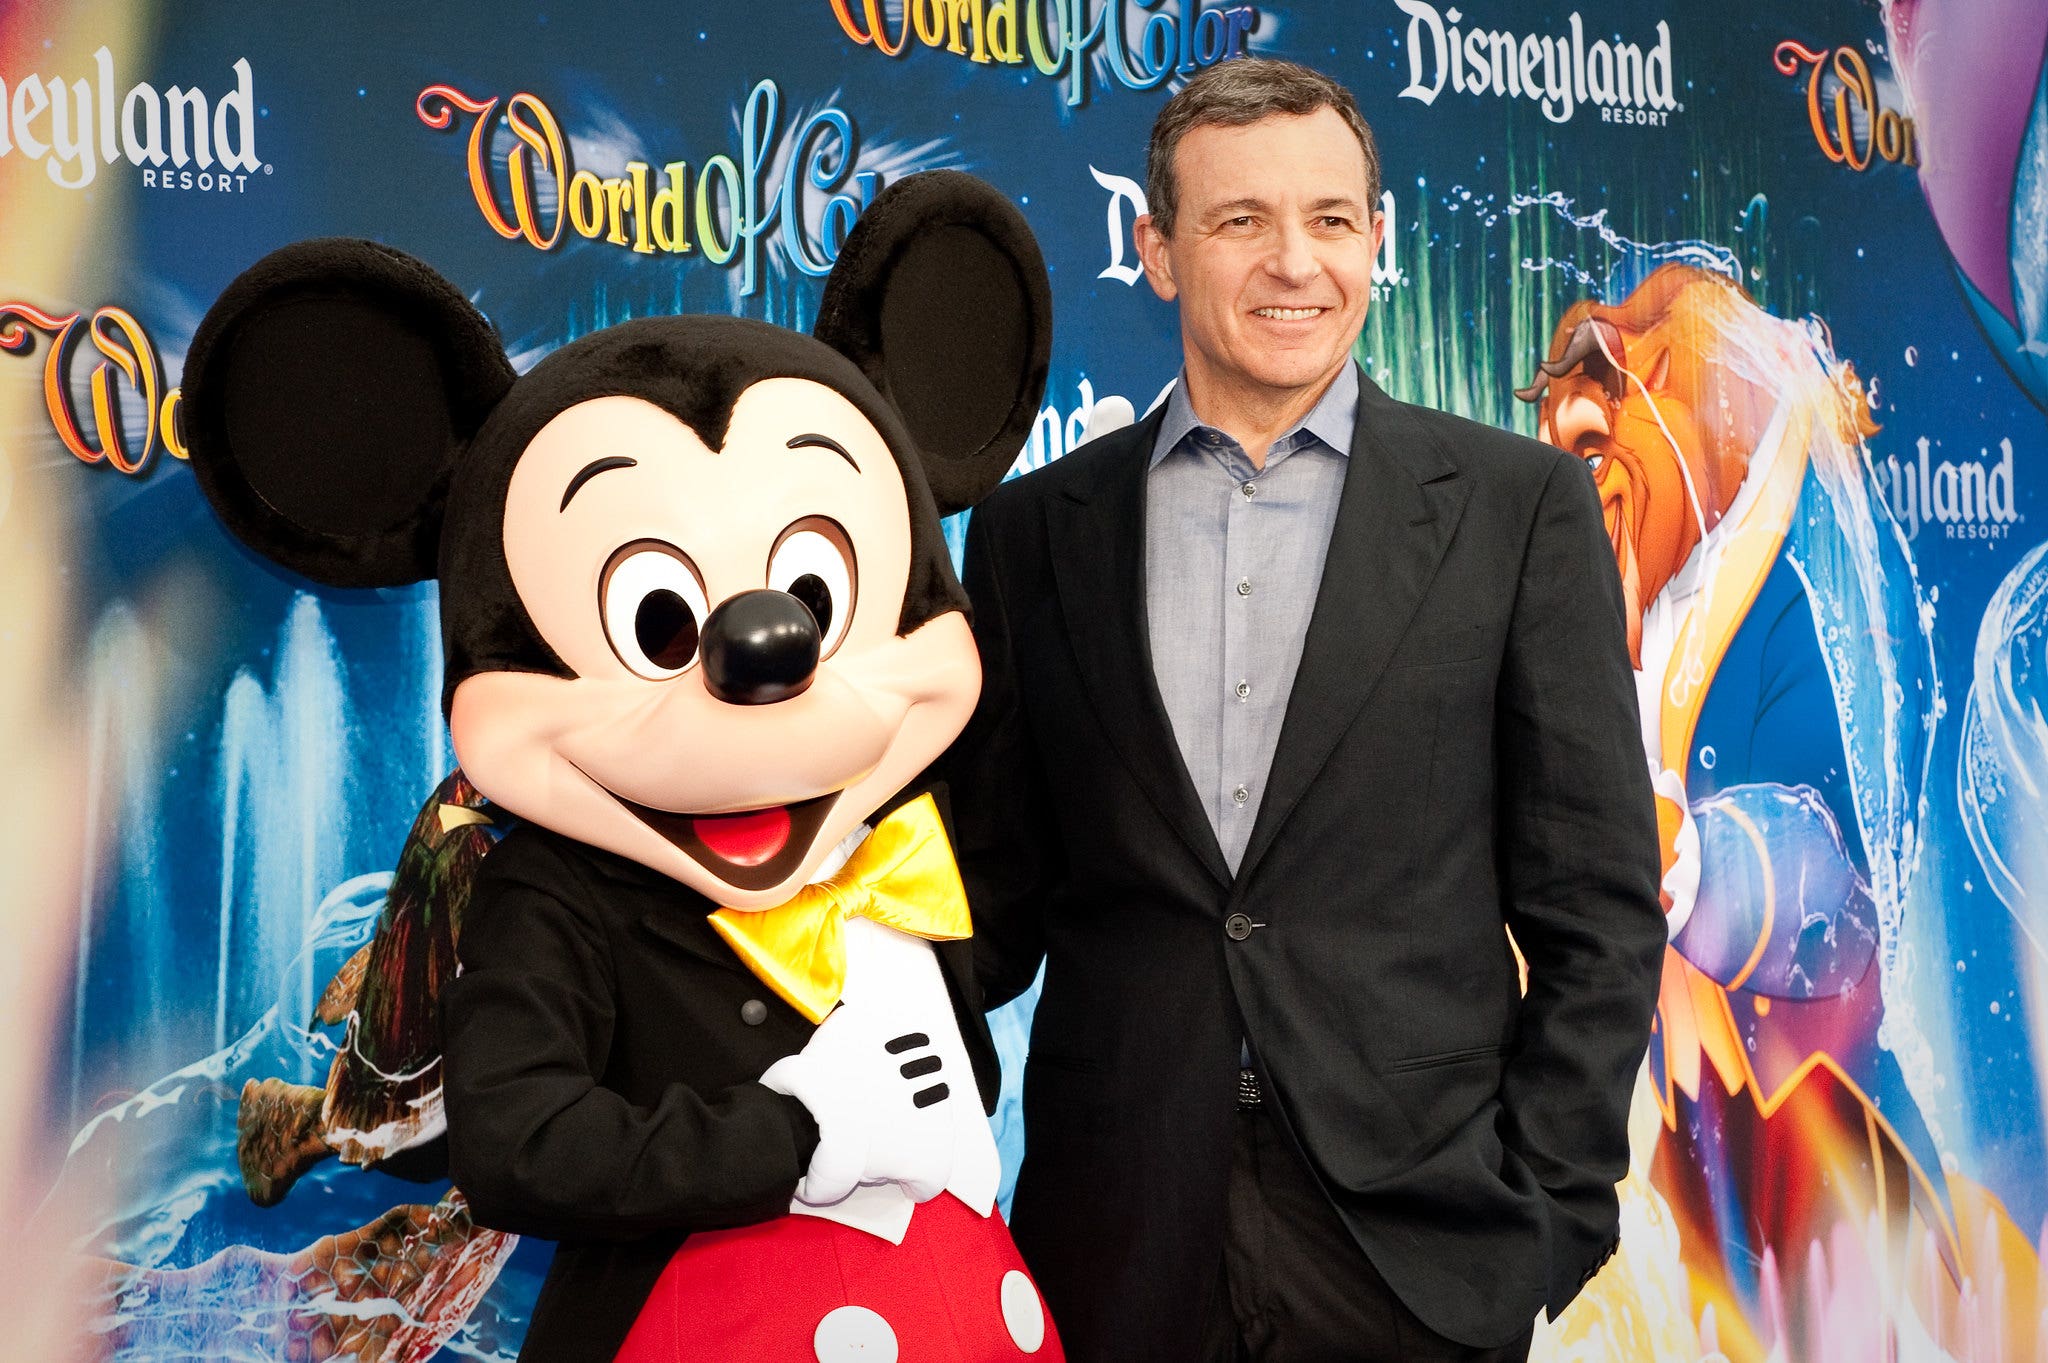 Disney To Restore Dividend By End Of Year, No ESPN Spinoff In The Works: Iger